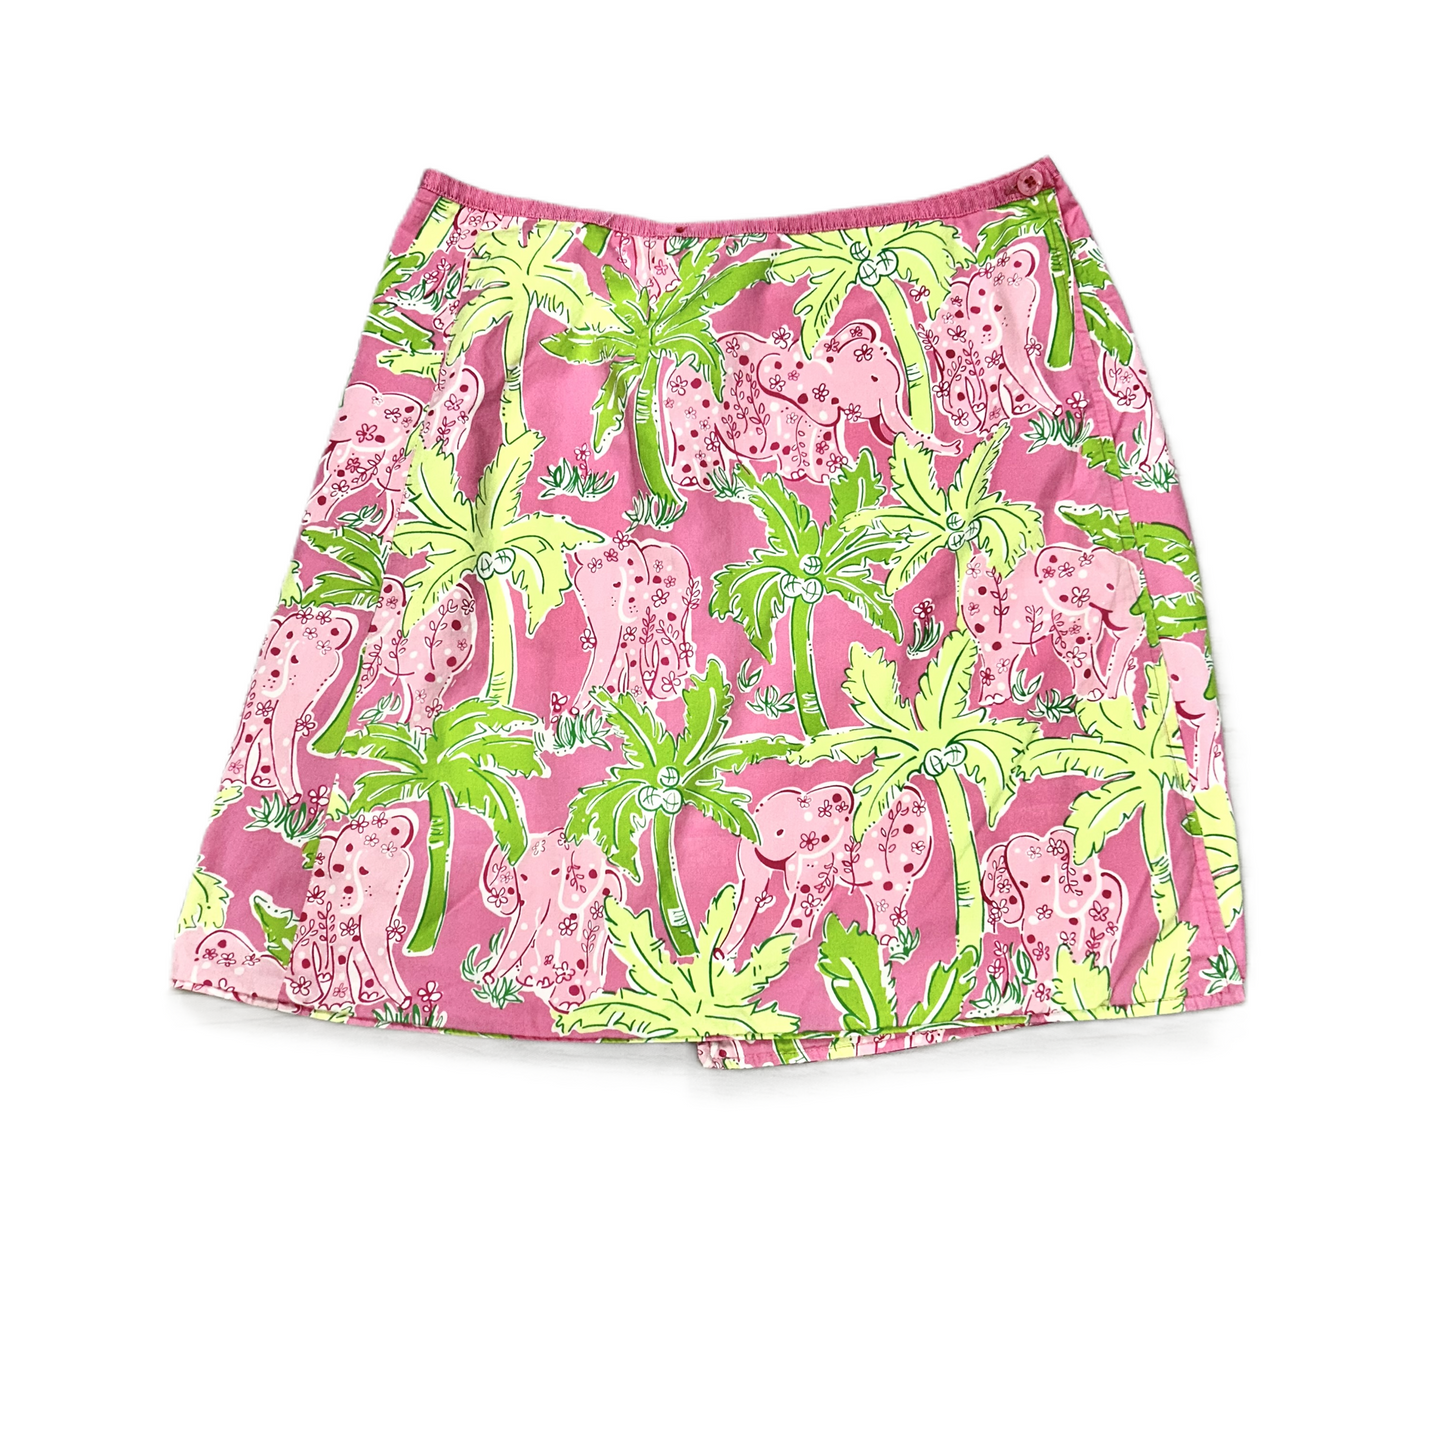 Green & Pink Skirt Designer By Lilly Pulitzer, Size: 2